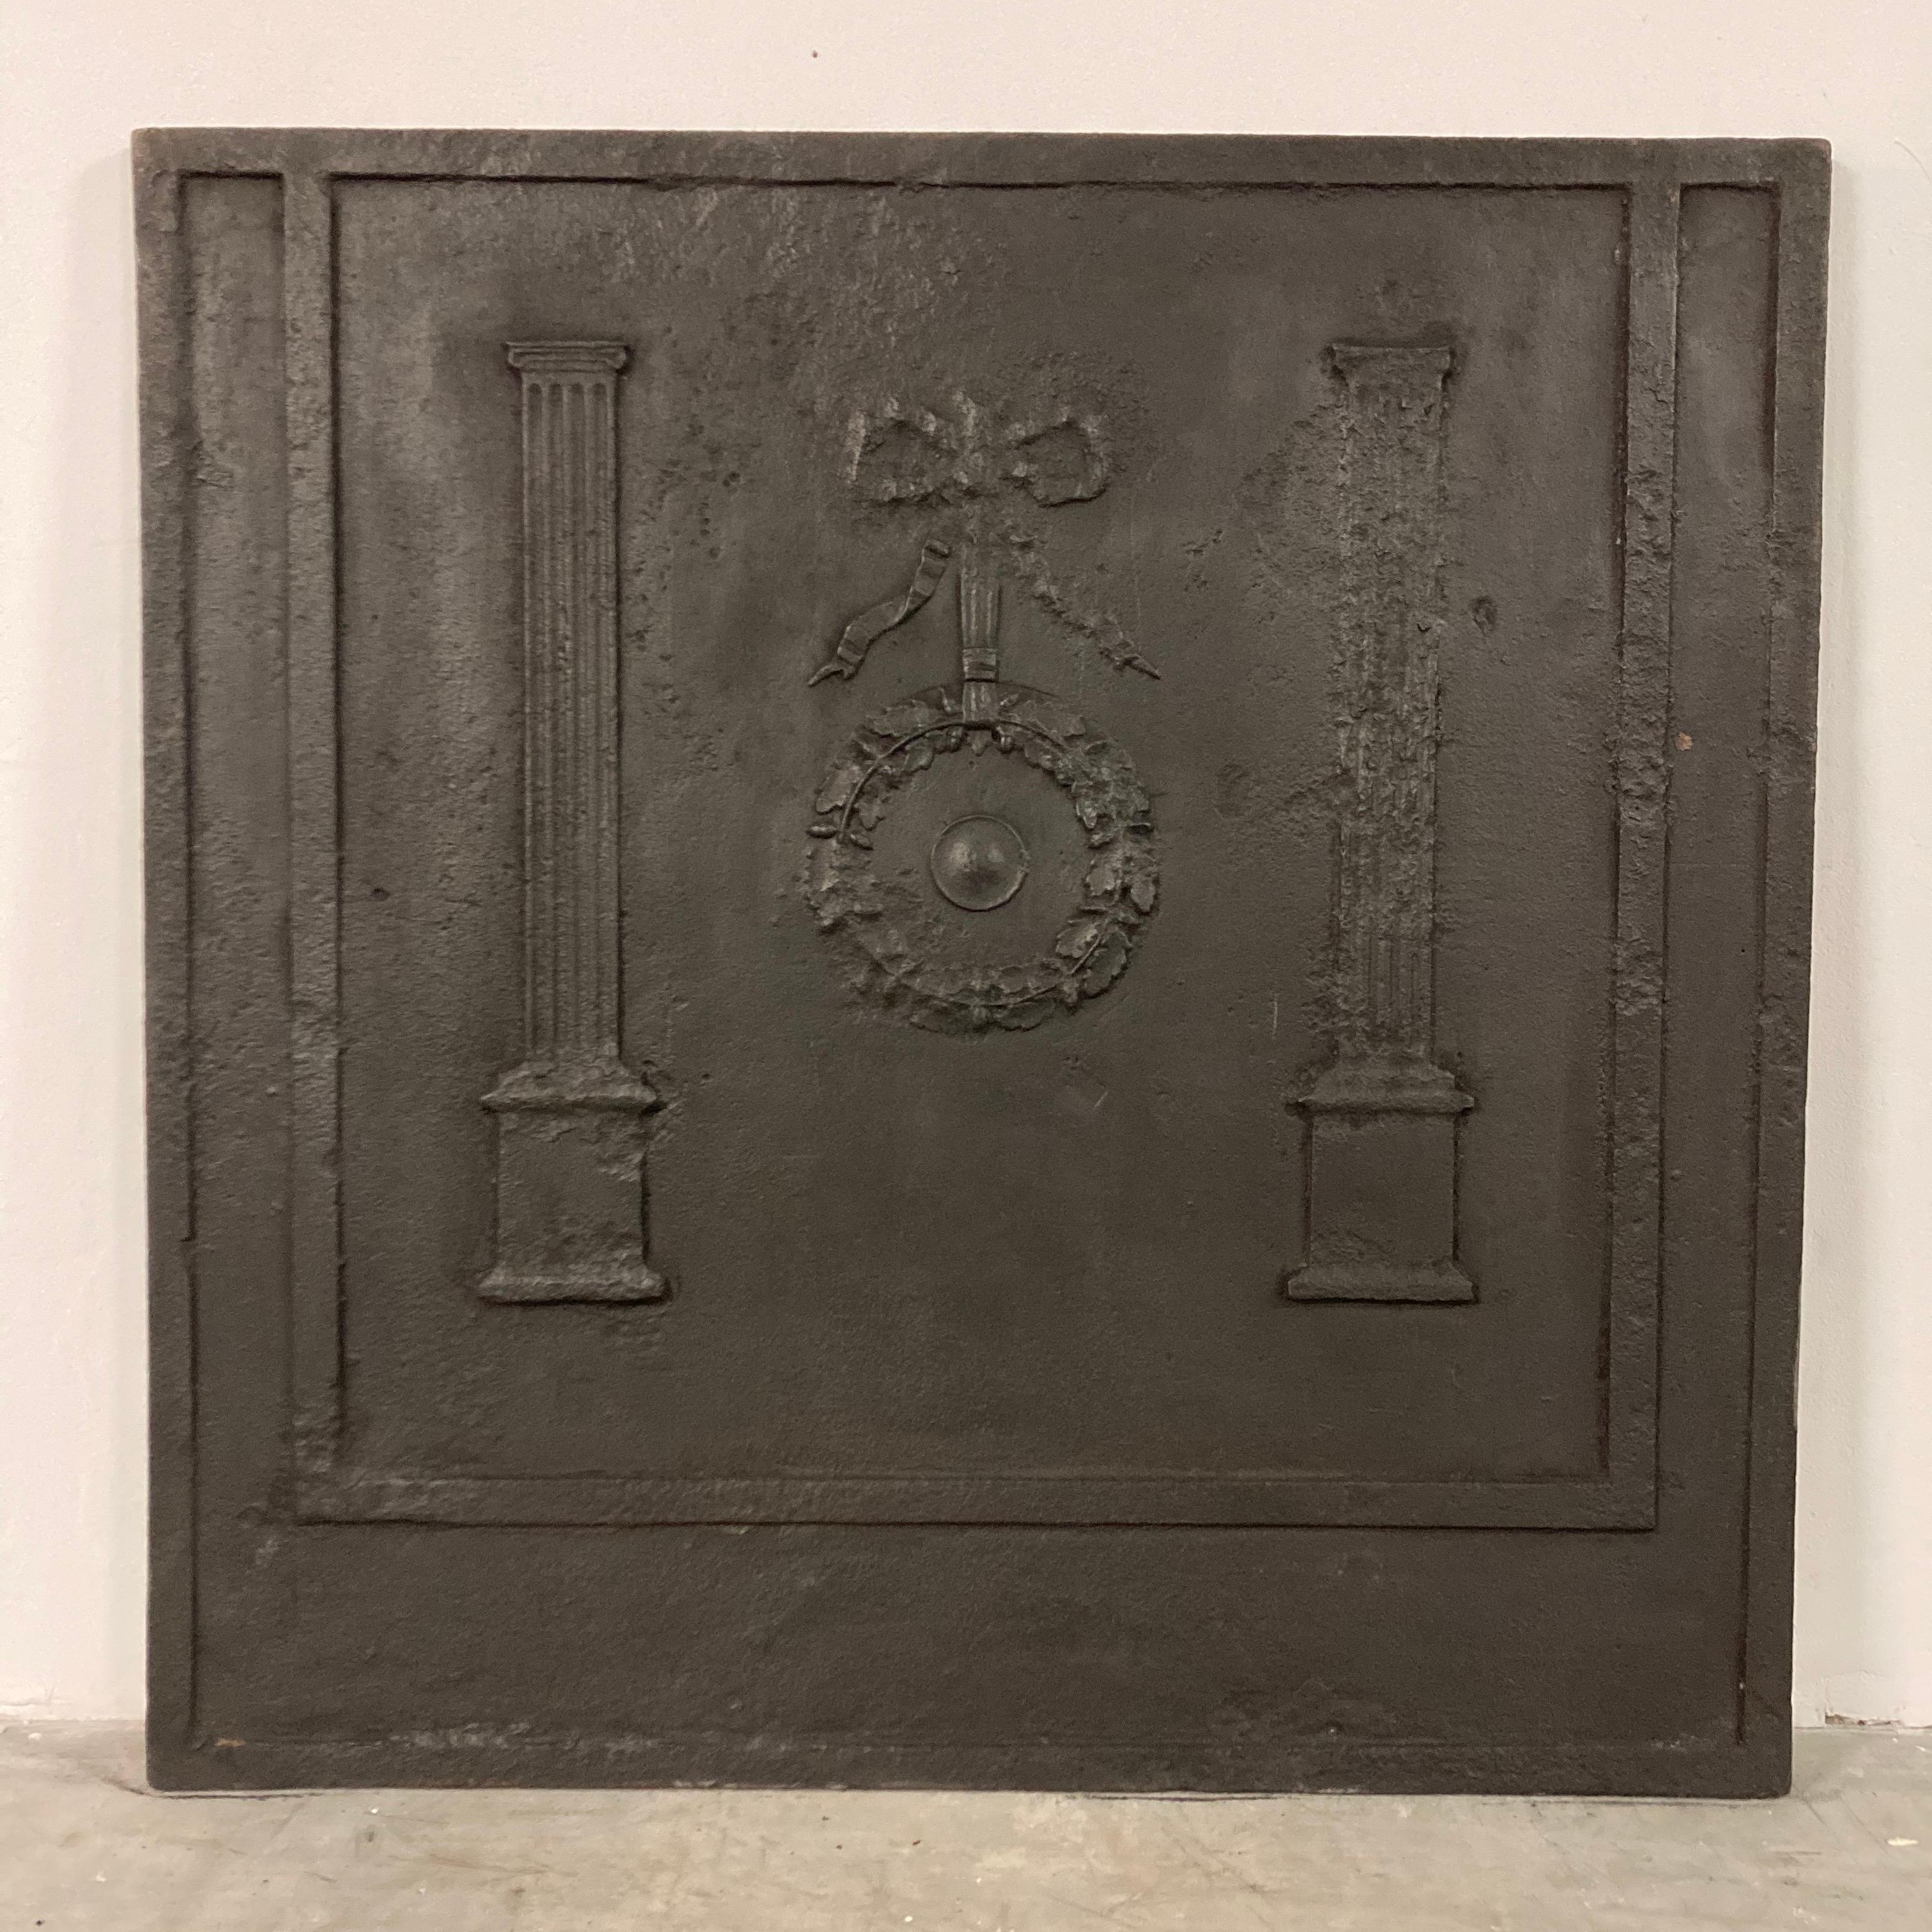 Nice architectural French cast iron fireback, 19th century
Lovely centered hanging floral wreath between to profiled columns.

Great condition, lovely used patina,.
98 x 98 x 2.